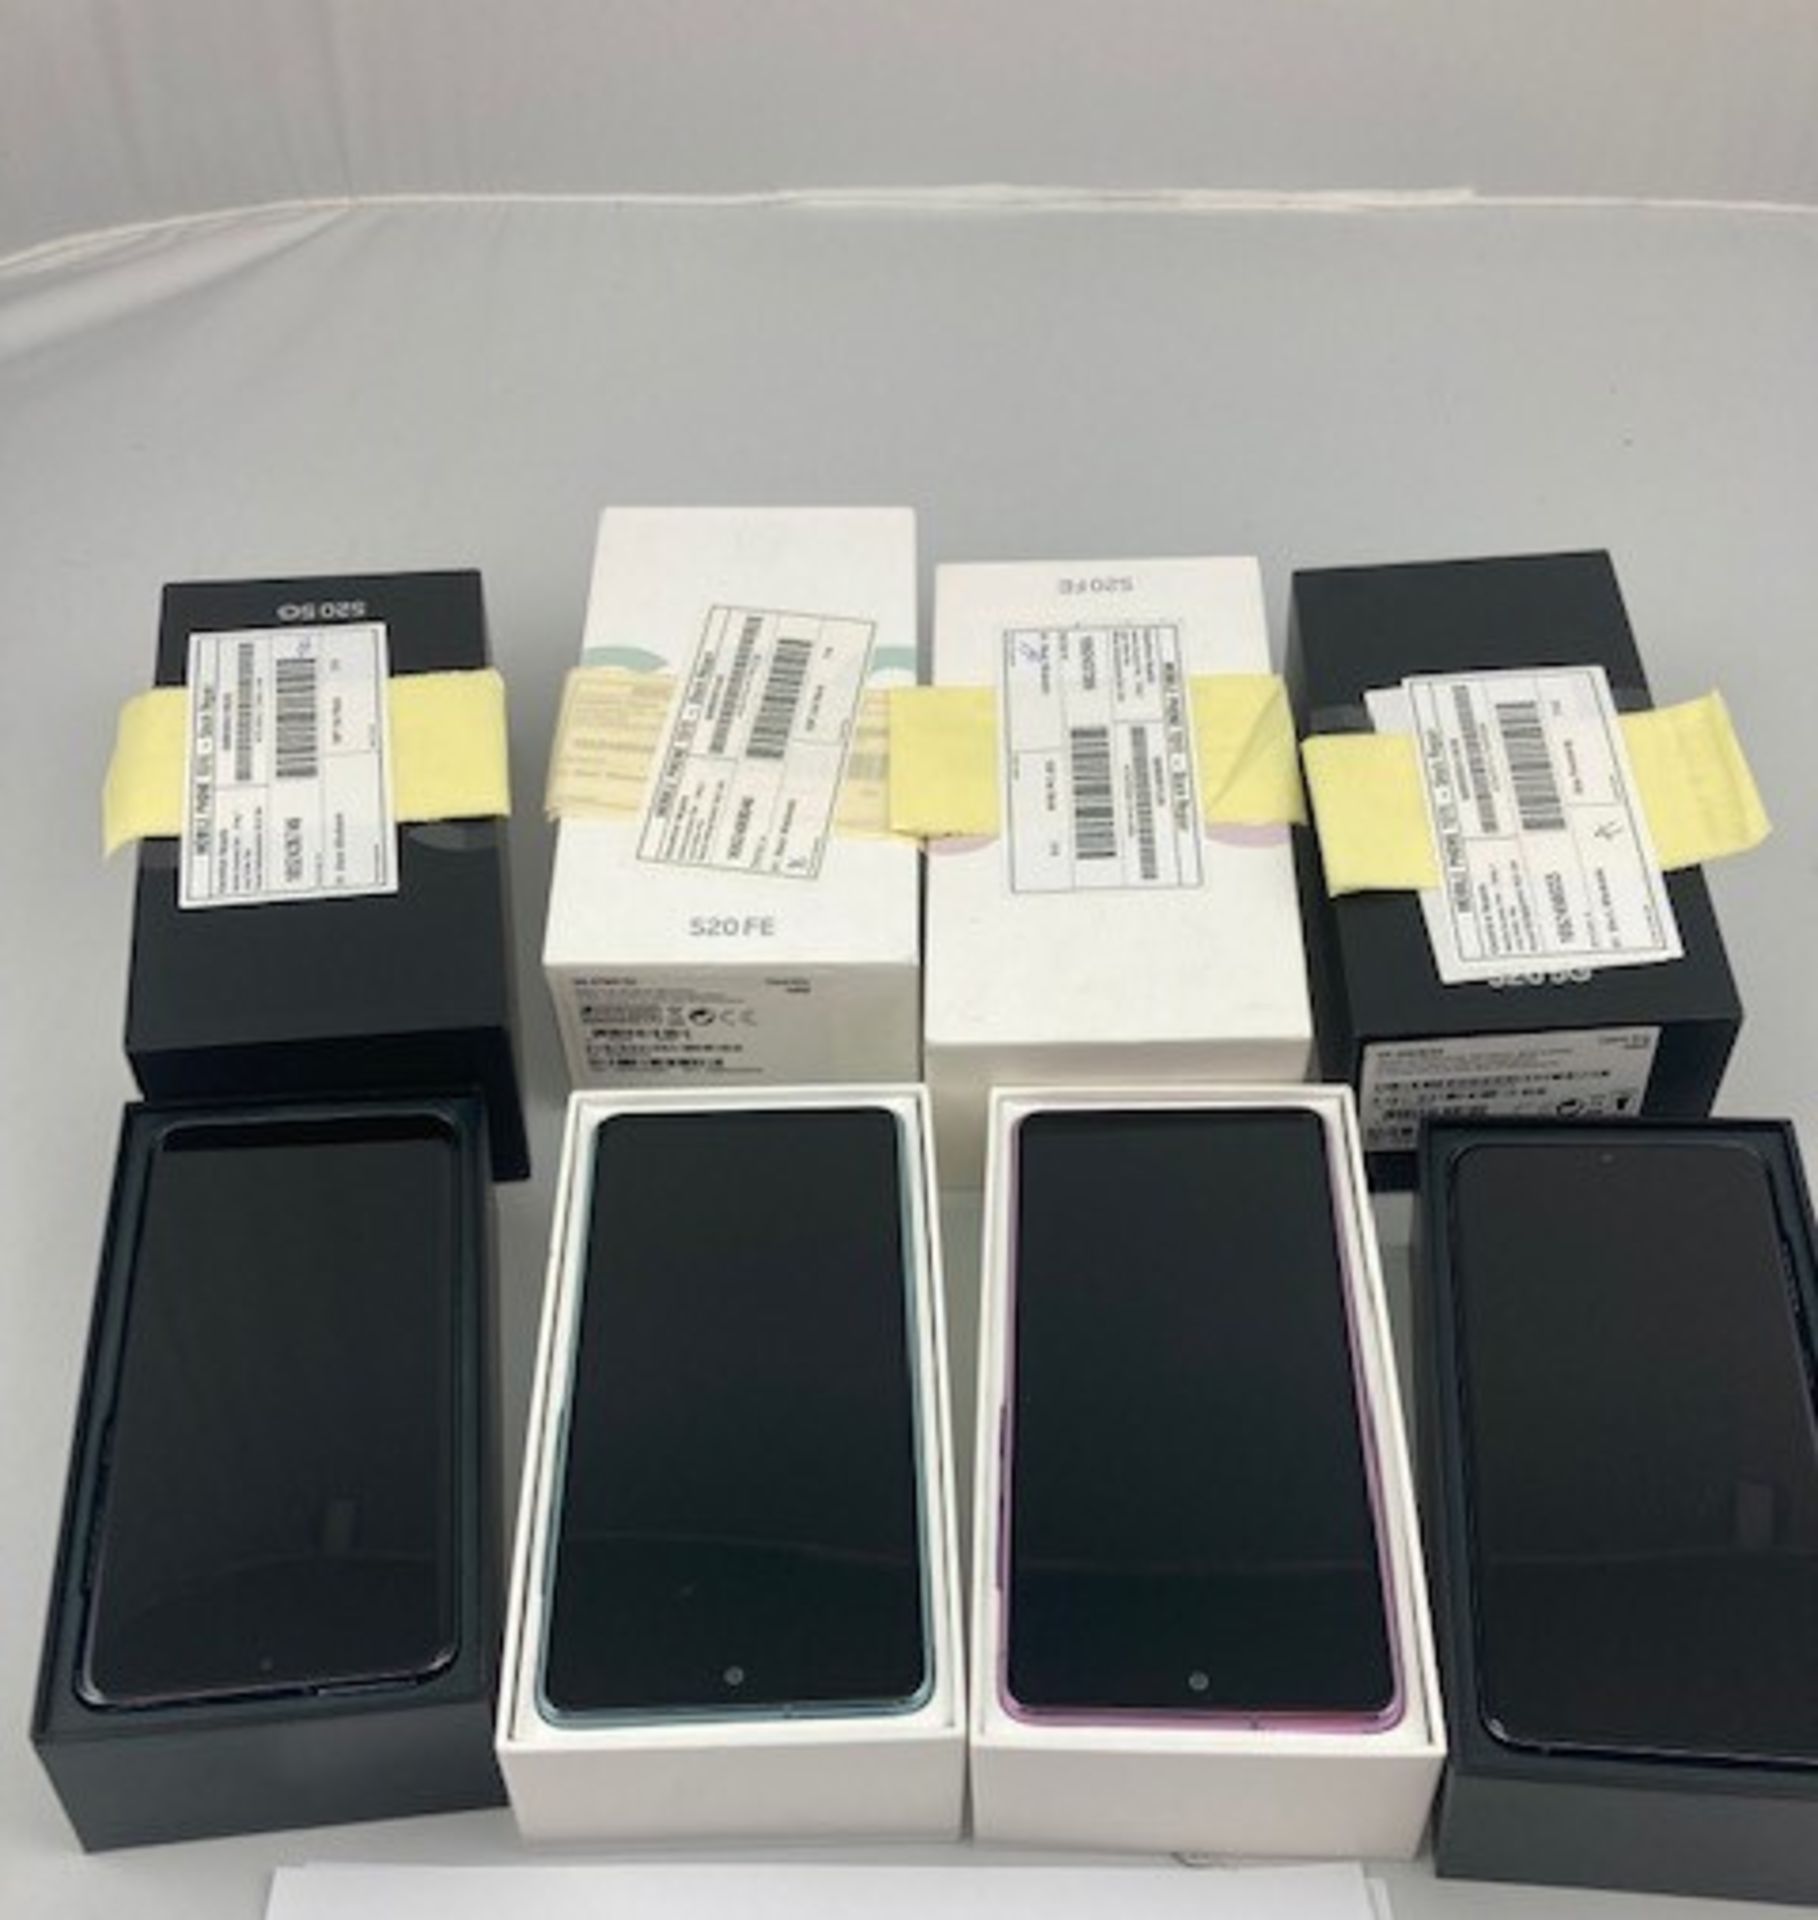 Box of 4 SAMSUNG Galaxy S20 Handsets. Latest selling price £2997.98